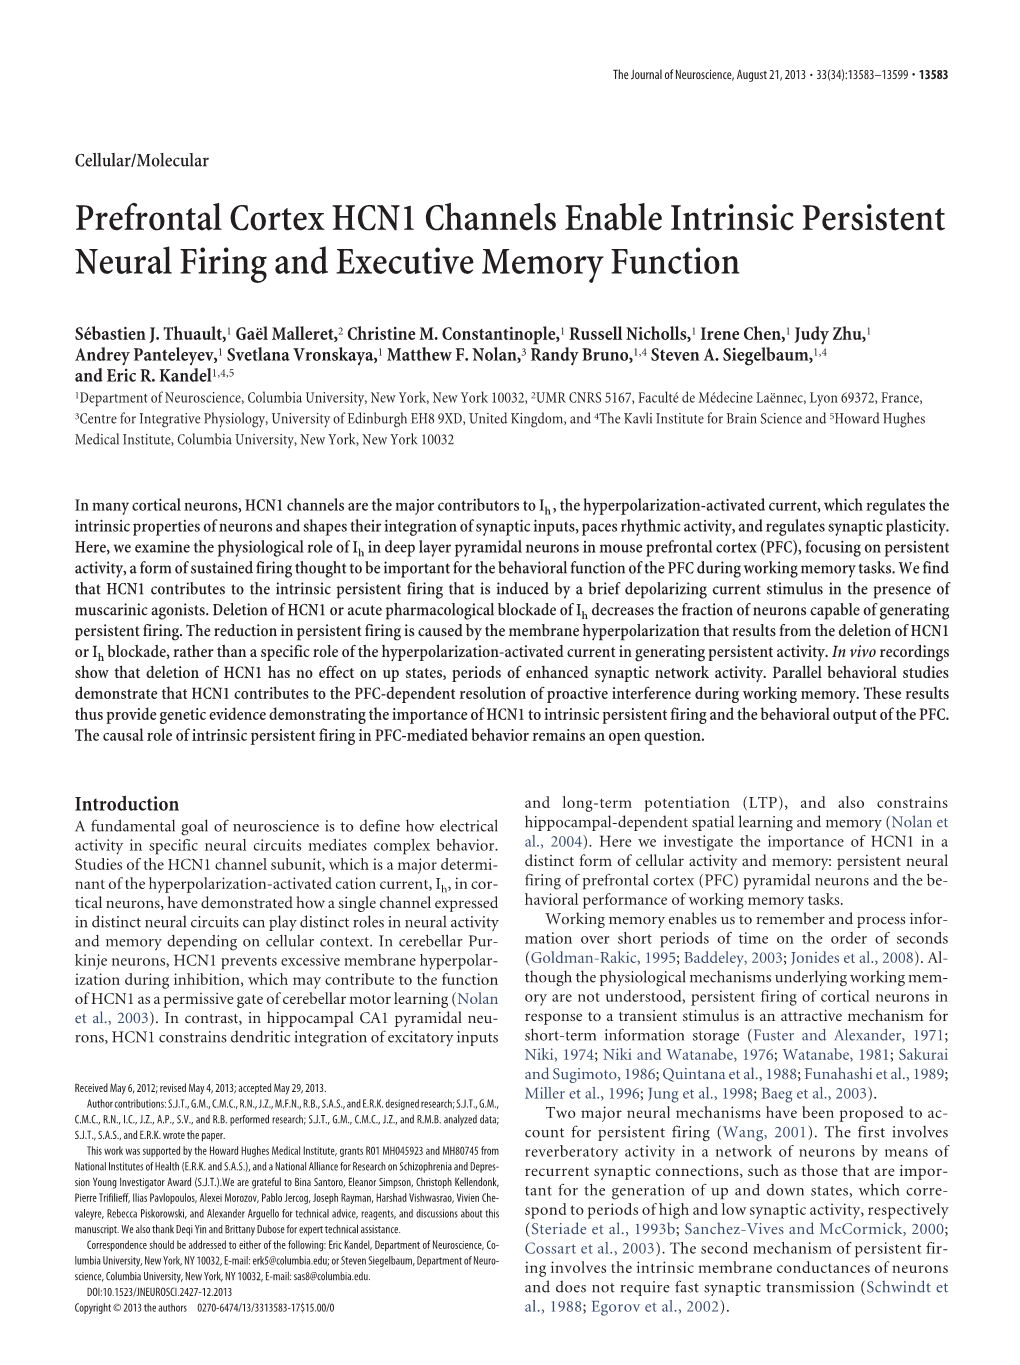 Prefrontal Cortex HCN1 Channels Enable Intrinsic Persistent Neural Firing and Executive Memory Function